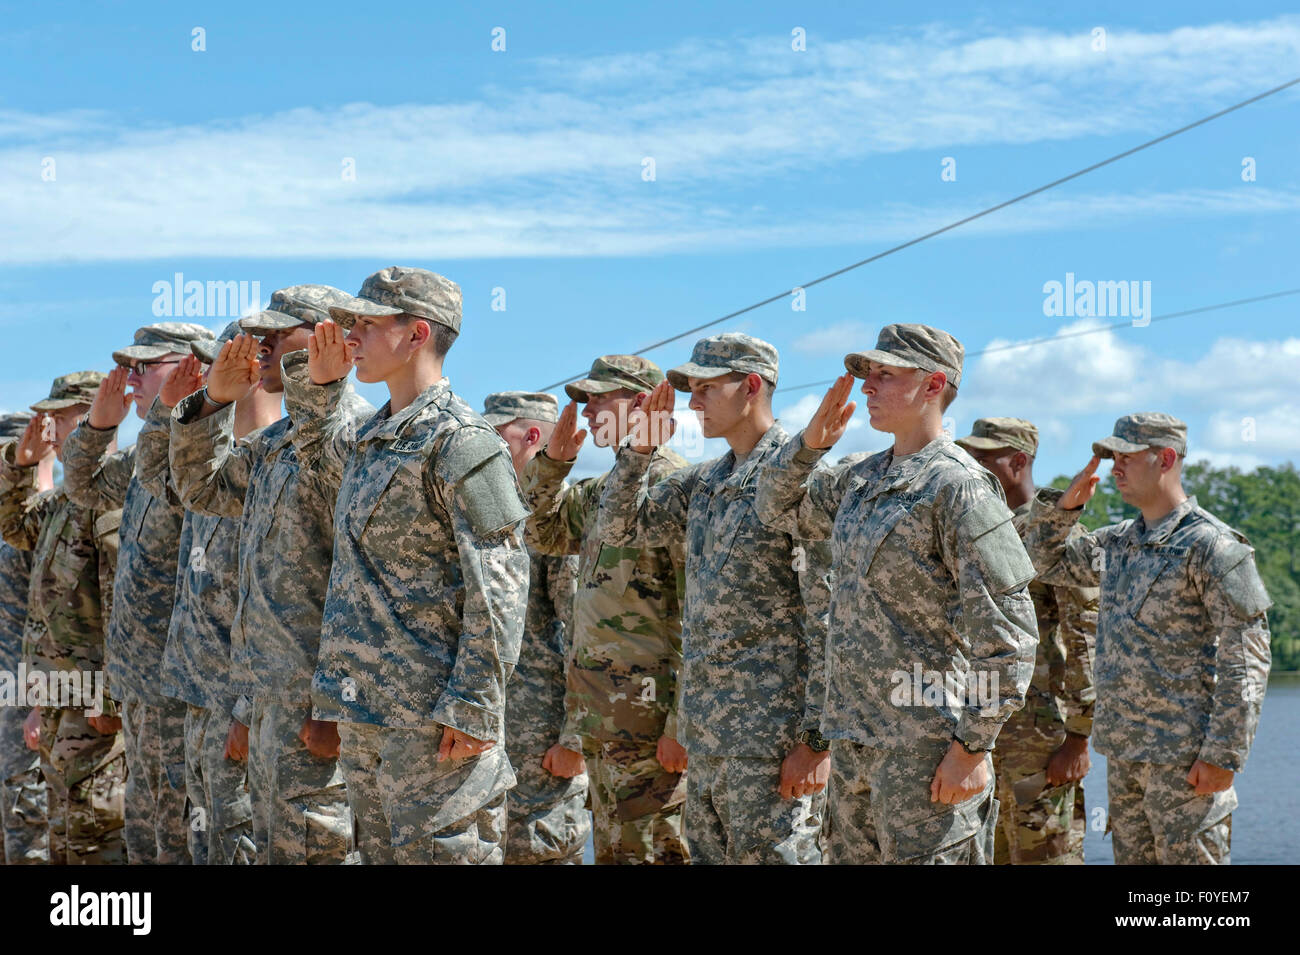 U.S. Army Captain Kristen Griest, left, and fellow soldier 1st Lt Shaye Haver, center, salute along with their class after becoming the first women to graduate from Army Ranger school August 21, 2015 at Fort Benning, Georgia. Stock Photo